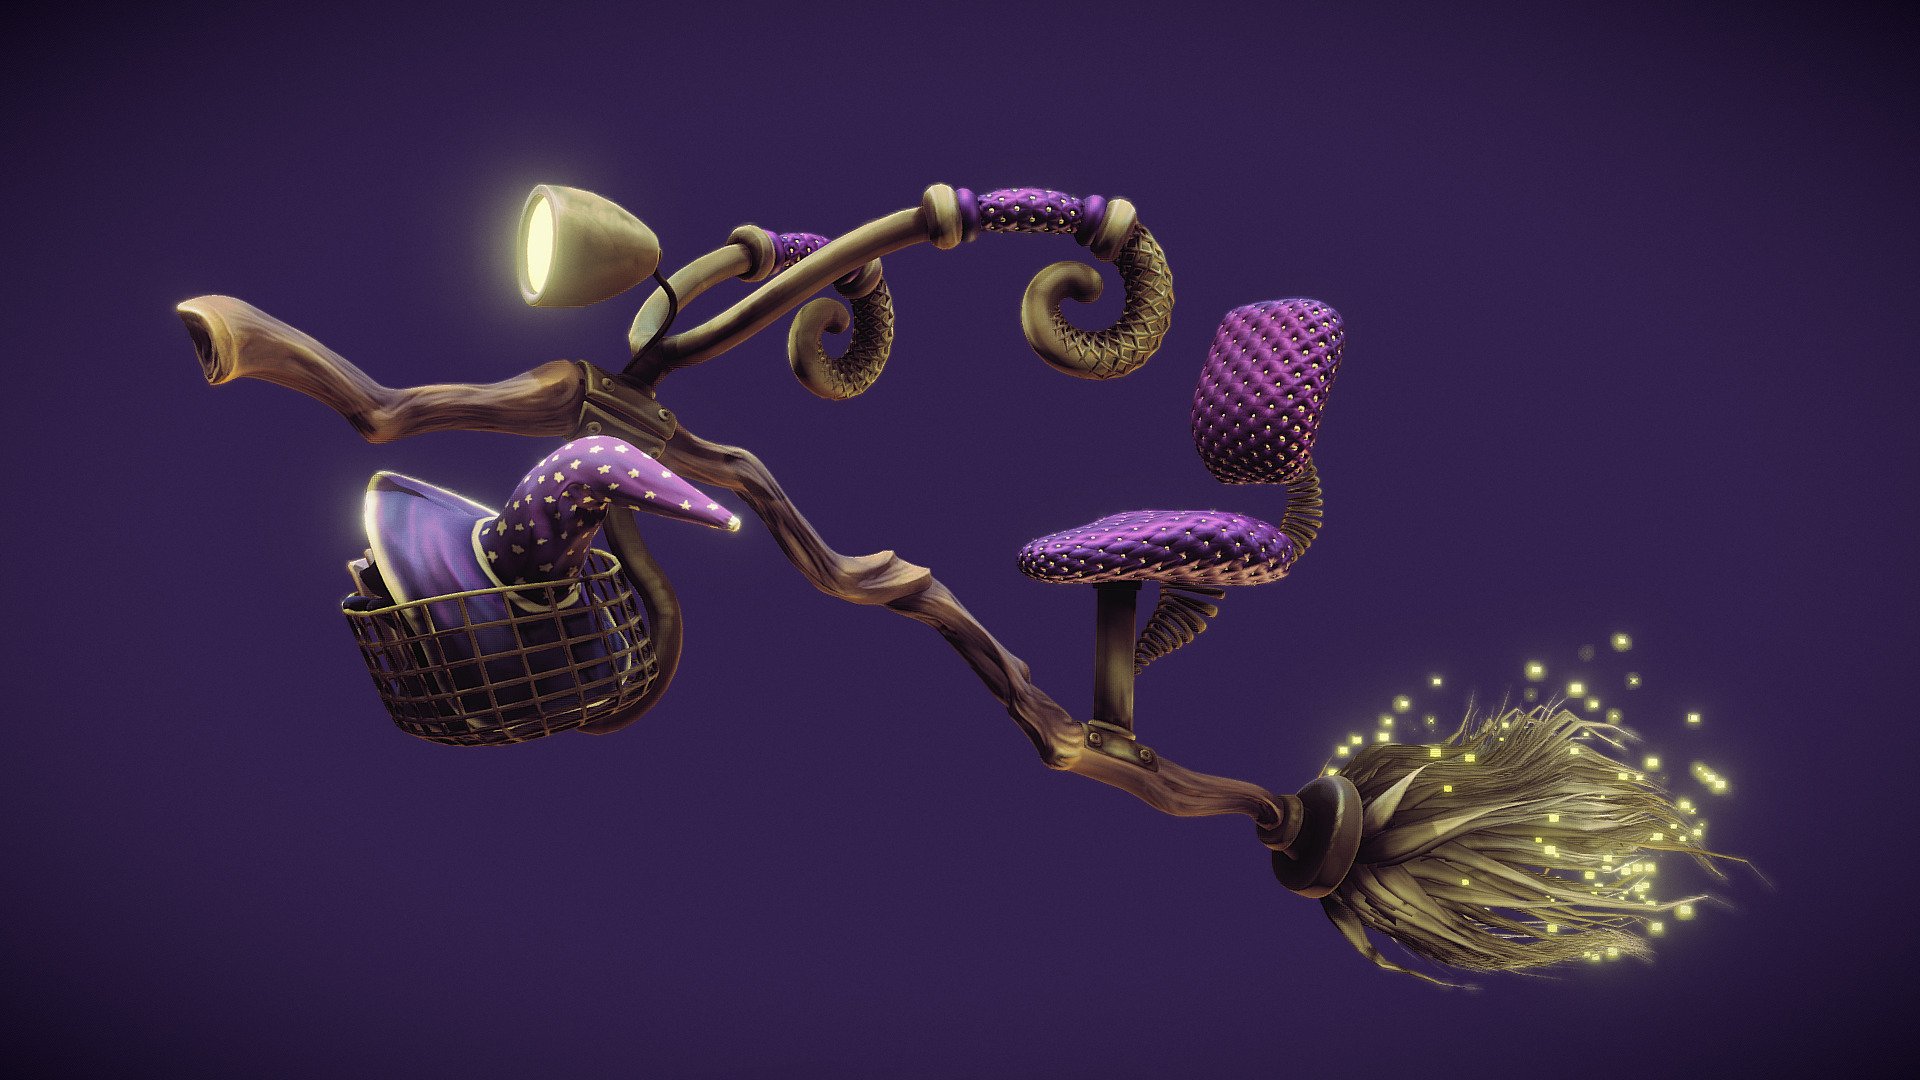 Trying out handpainted textures for the #travelchallenge! A regular broomstick just won't do for a warlock on the go! This deluxe broom is complete with handlebars, a seat, and a friendly familiar. I was going to add cupholders but not sure if that fits with the fantasy theme. Feel free to use this model for anything, it was mostly for practice. All done in Blender.

Also, despite what the bottom says, this model is probably not compatible with Unity/Unreal. The broom is all individual objects with their own textures, as that was the fastest and easiest workflow to follow. The file is an absolute mess. If you feel like optimizing it for game engines anyway, feel free to share with credit. I might do it myself if enough people want that 3d model